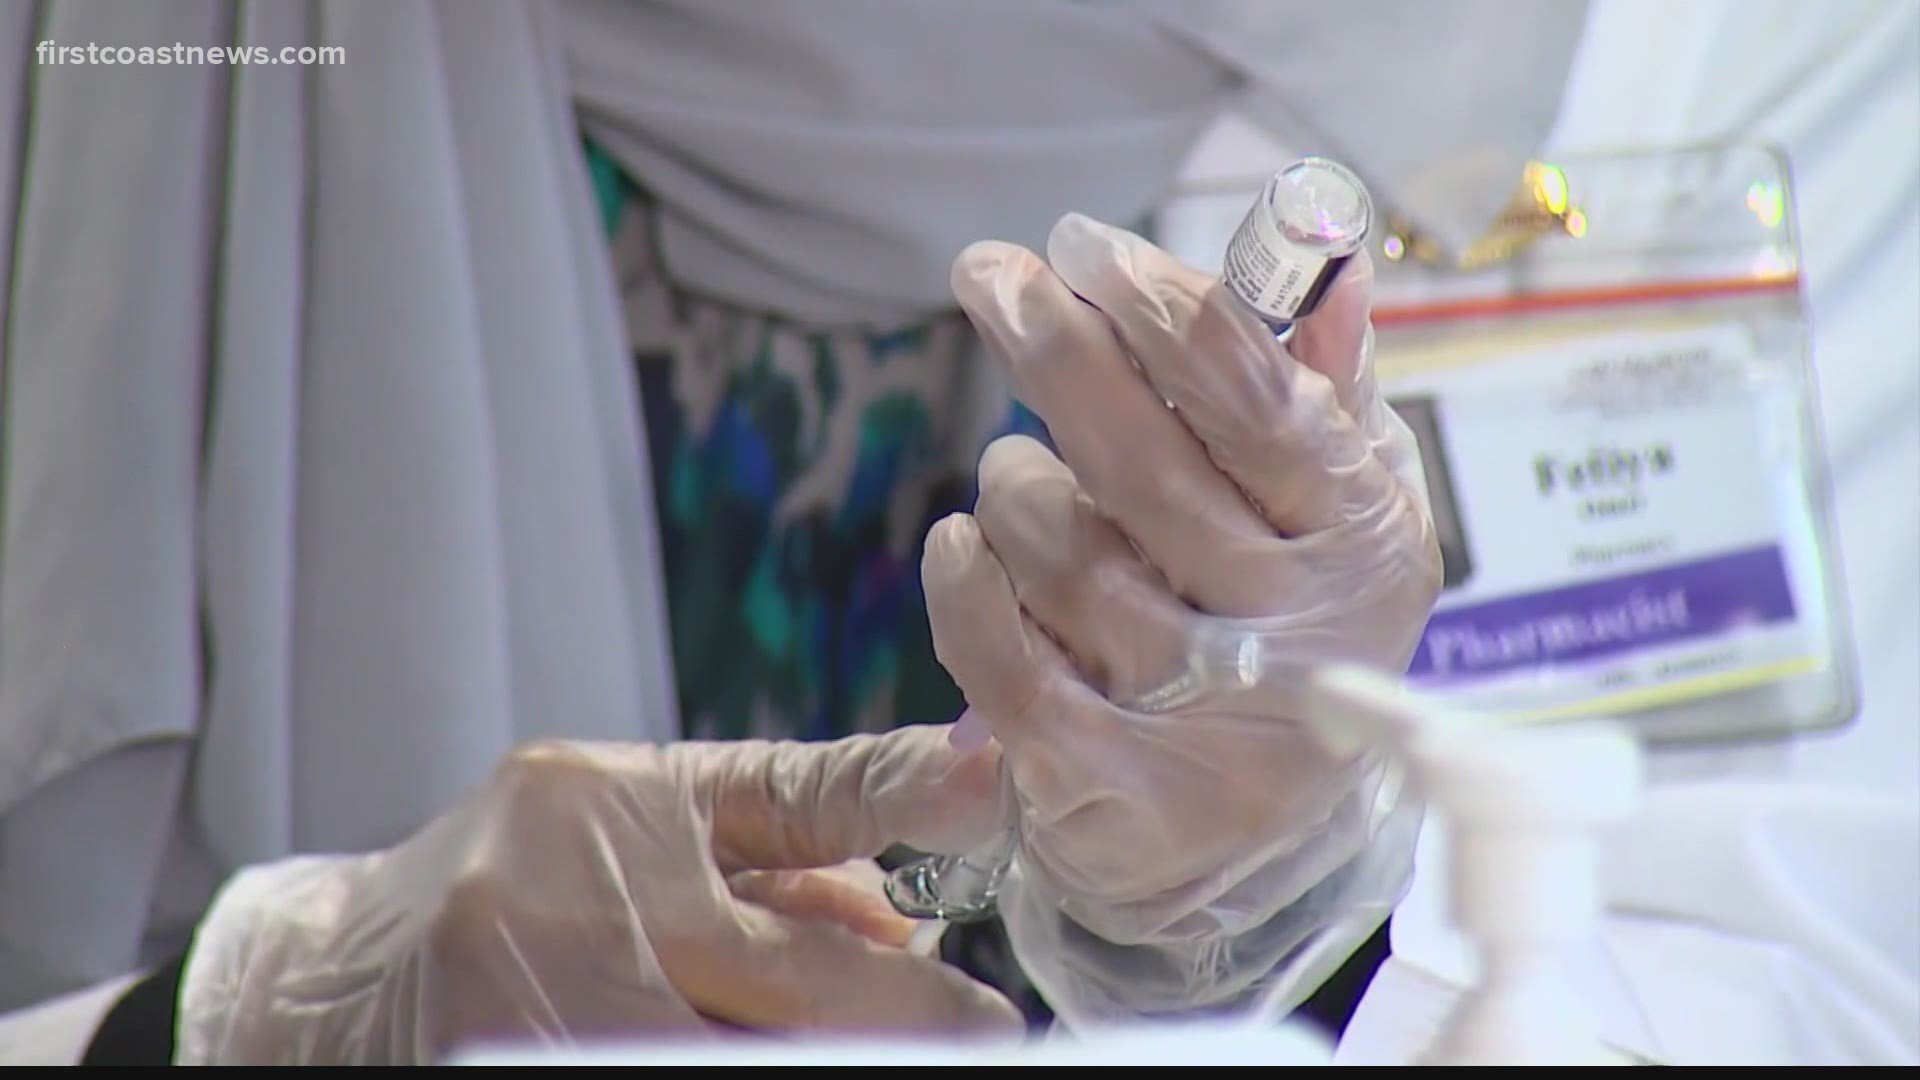 Doctors warn of potential risks of getting vaccine while taking some medications